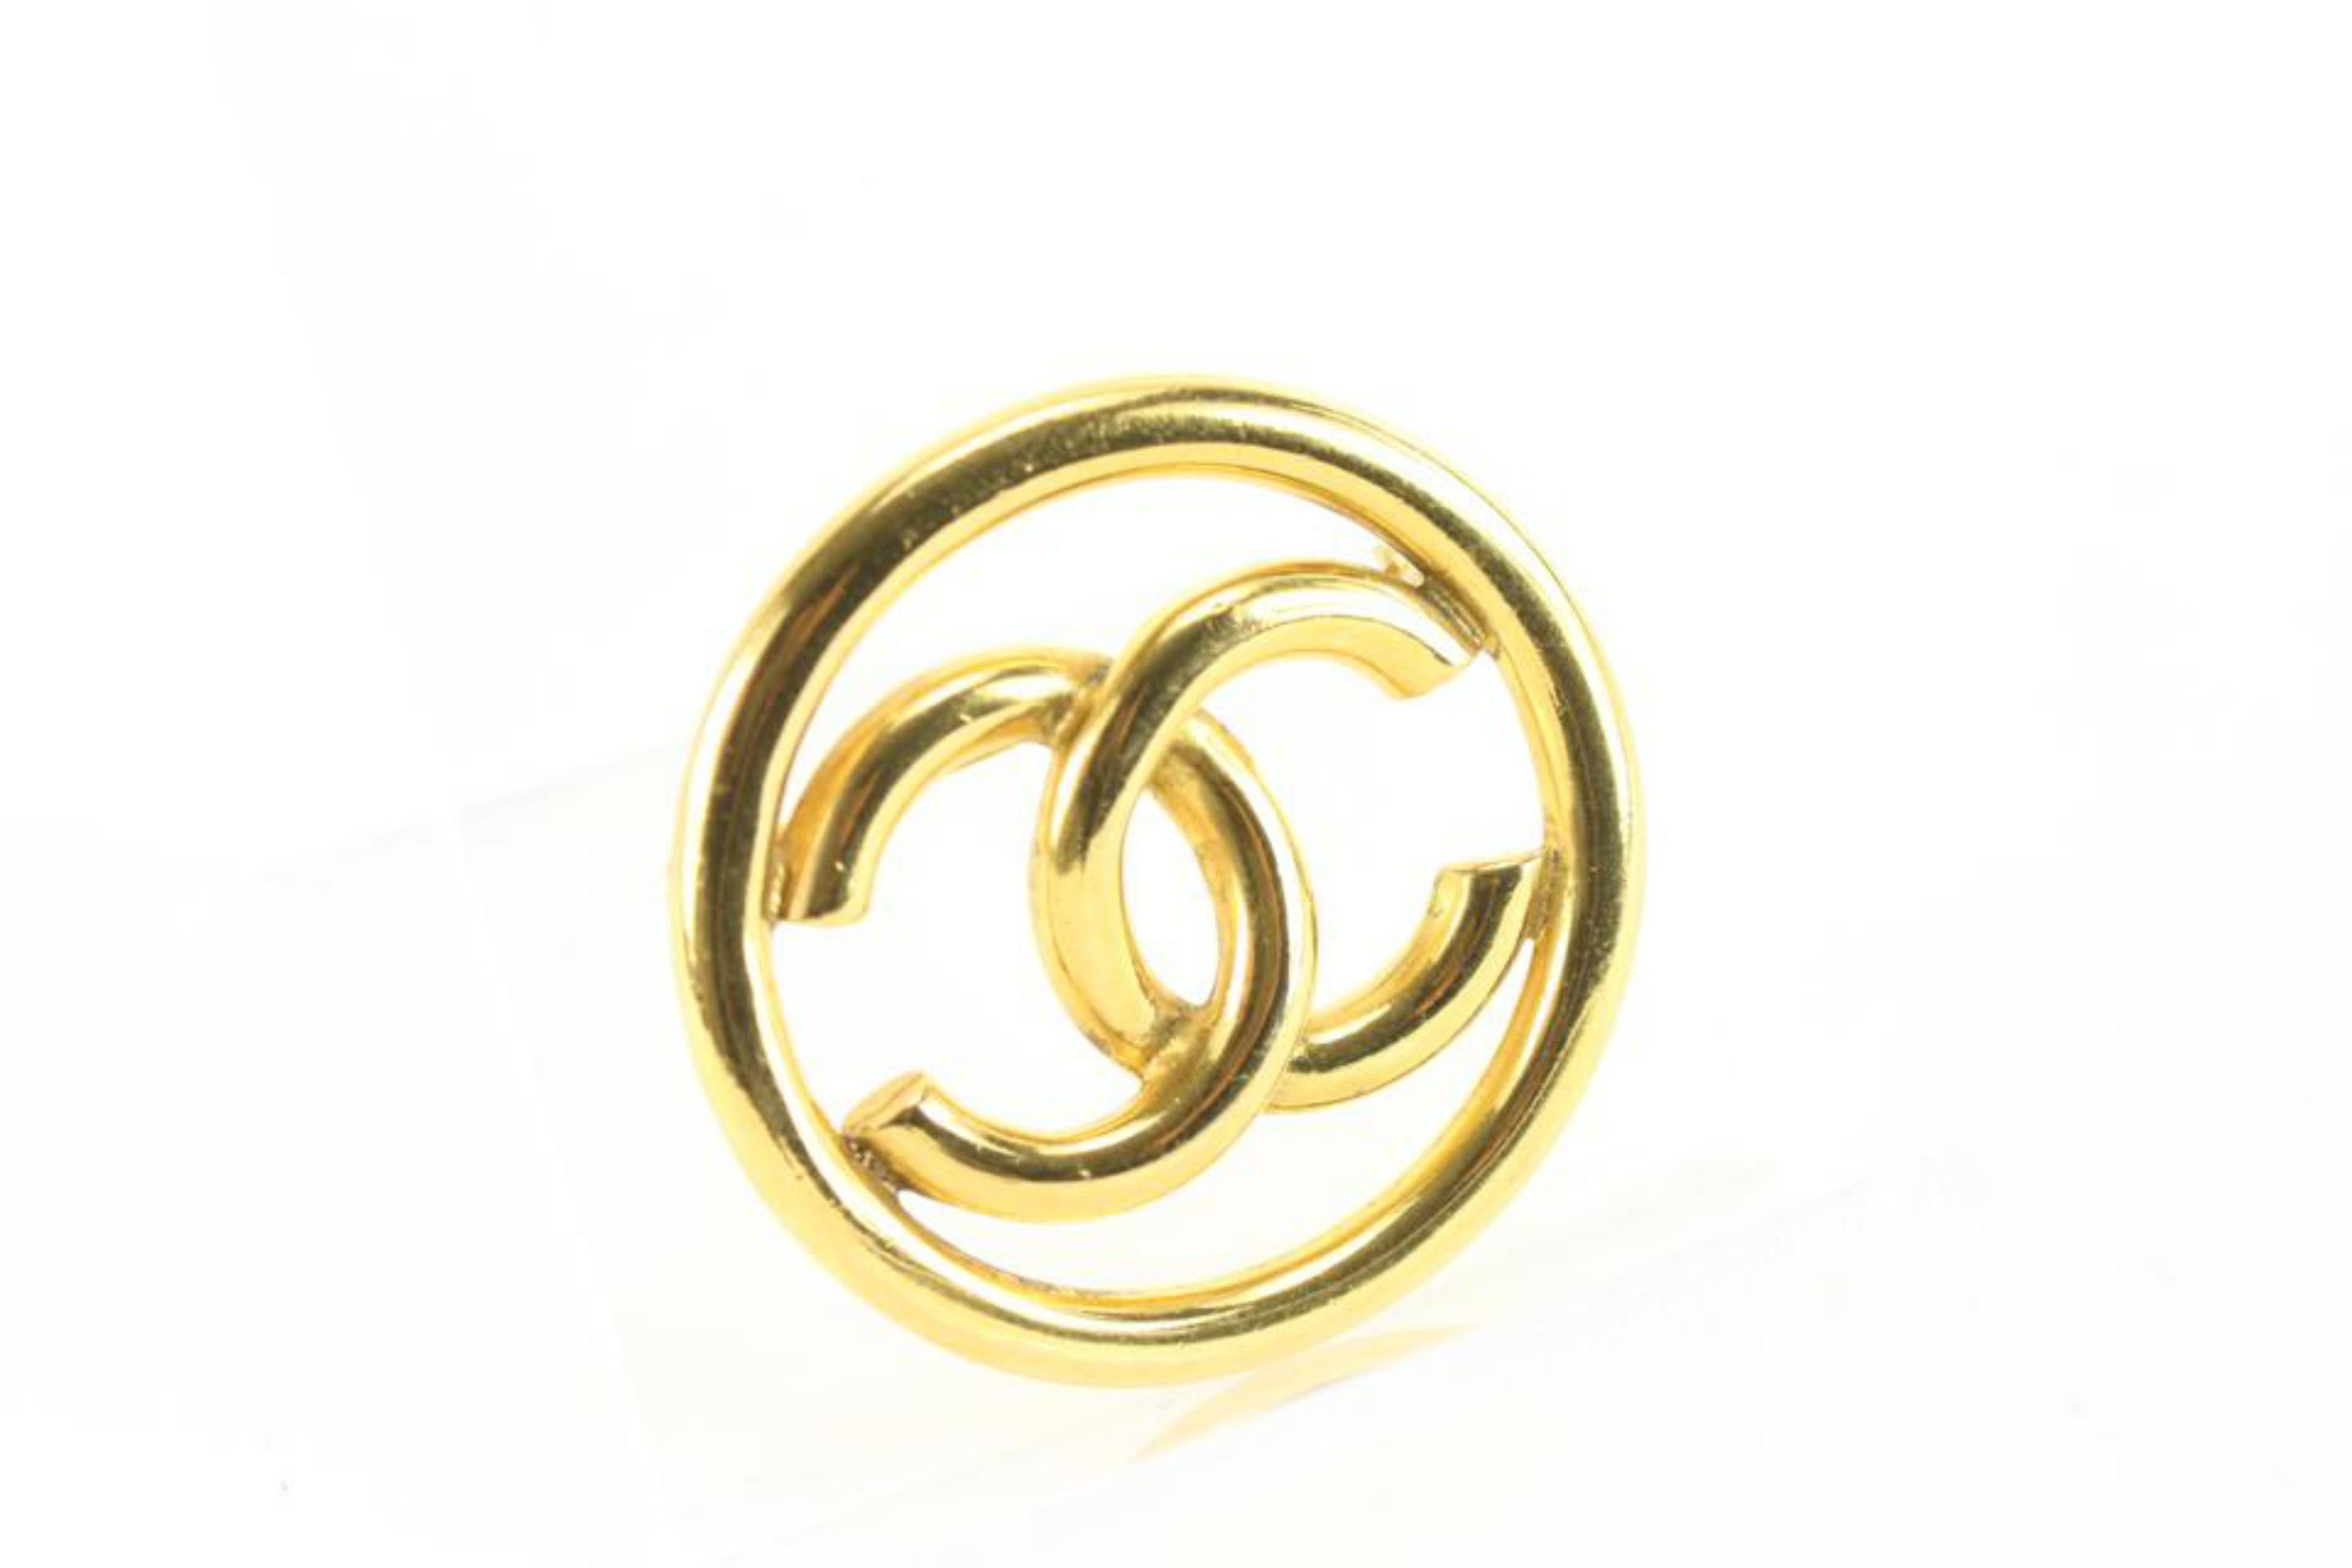 Chanel 93P 24k Gold Plate CC Logo Circle Brooch Pin 31ck824s For Sale 4